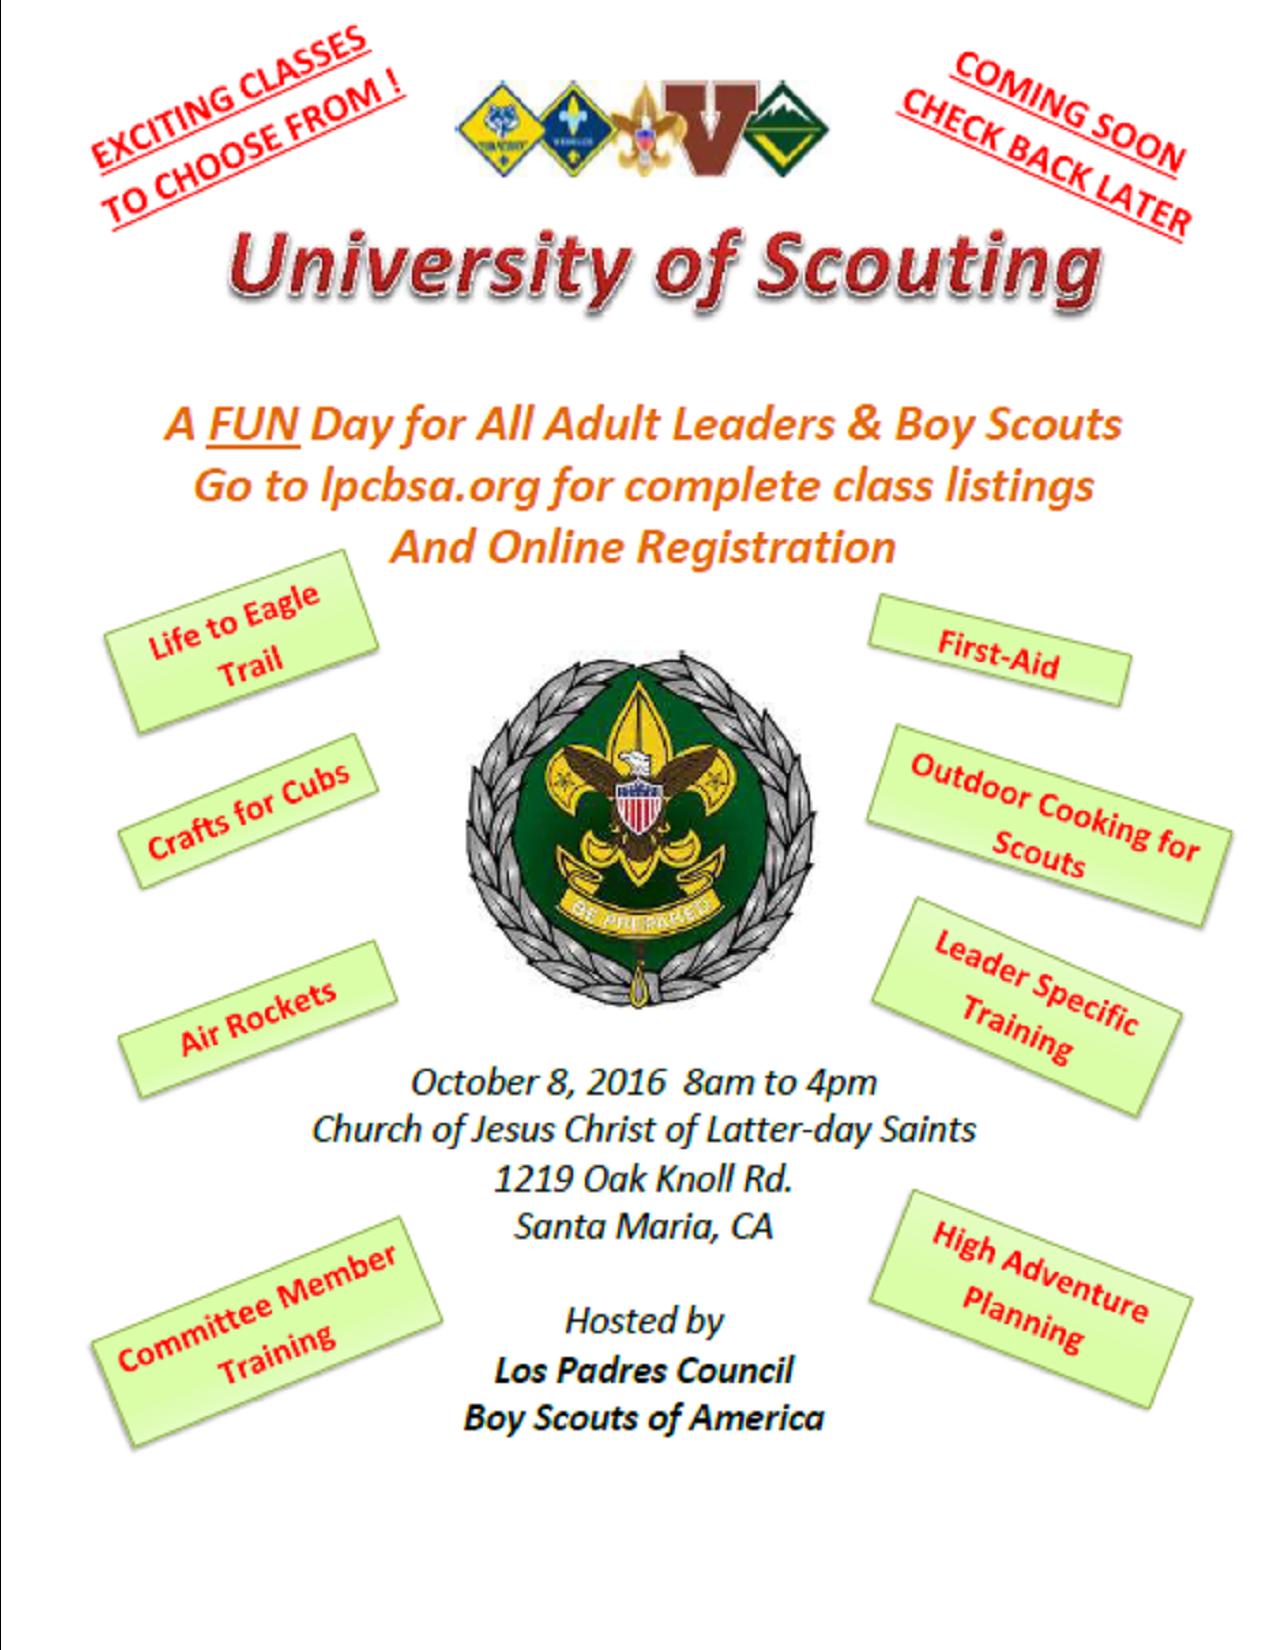 2016 University of Scouting Promotion Flyer